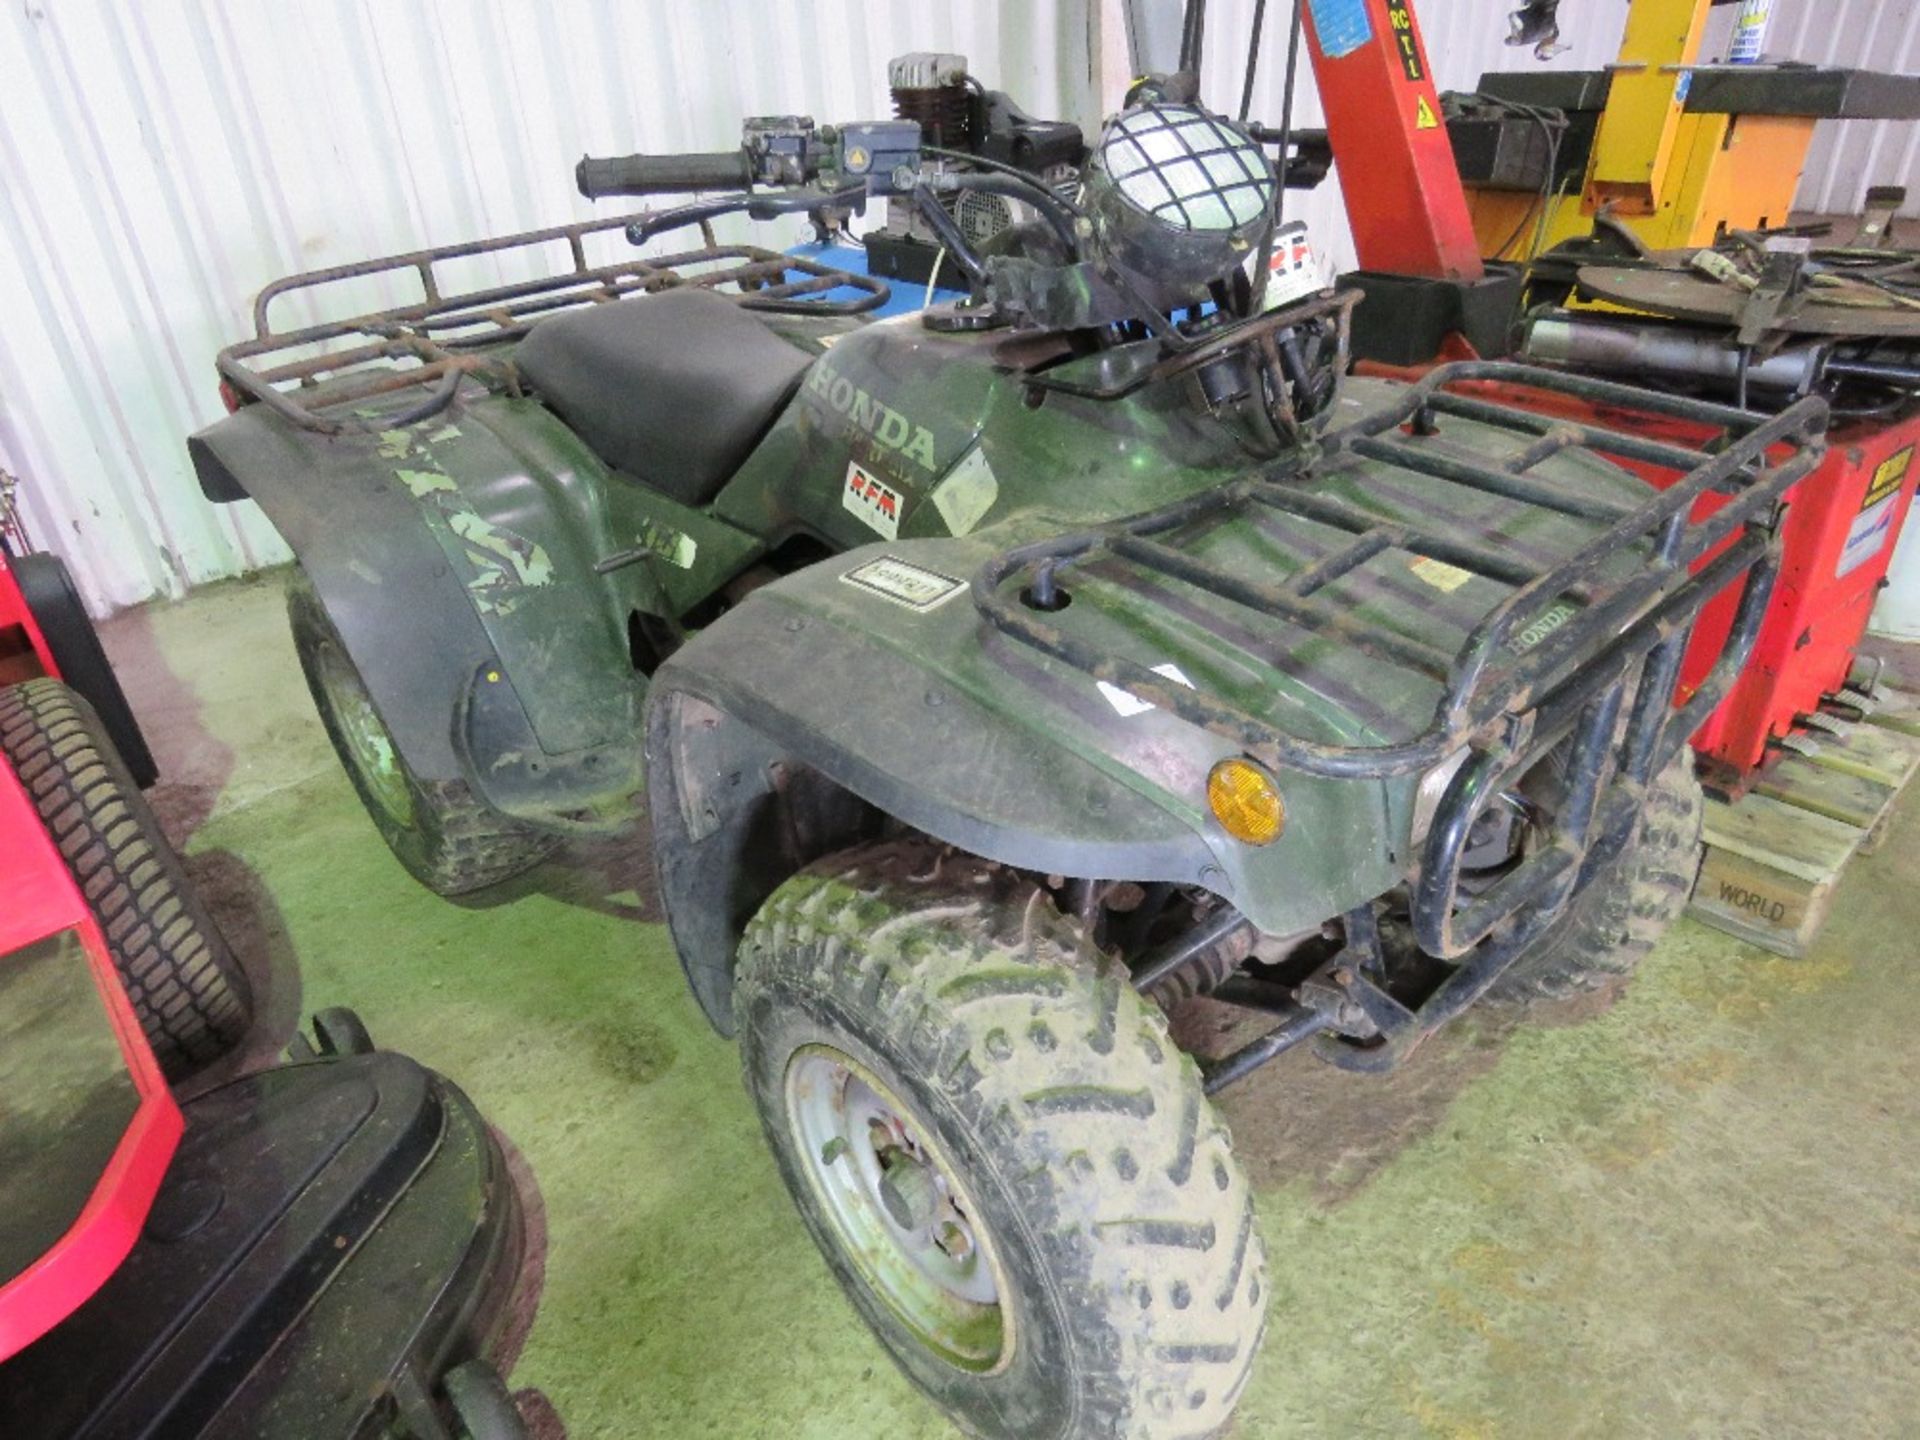 HONDA FOURTRAX 300 PETROL QUAD BIKE, 4WD. WHEN TESTED WAS SEEN TO TURN OVER BUT NOT STARTING...PRES